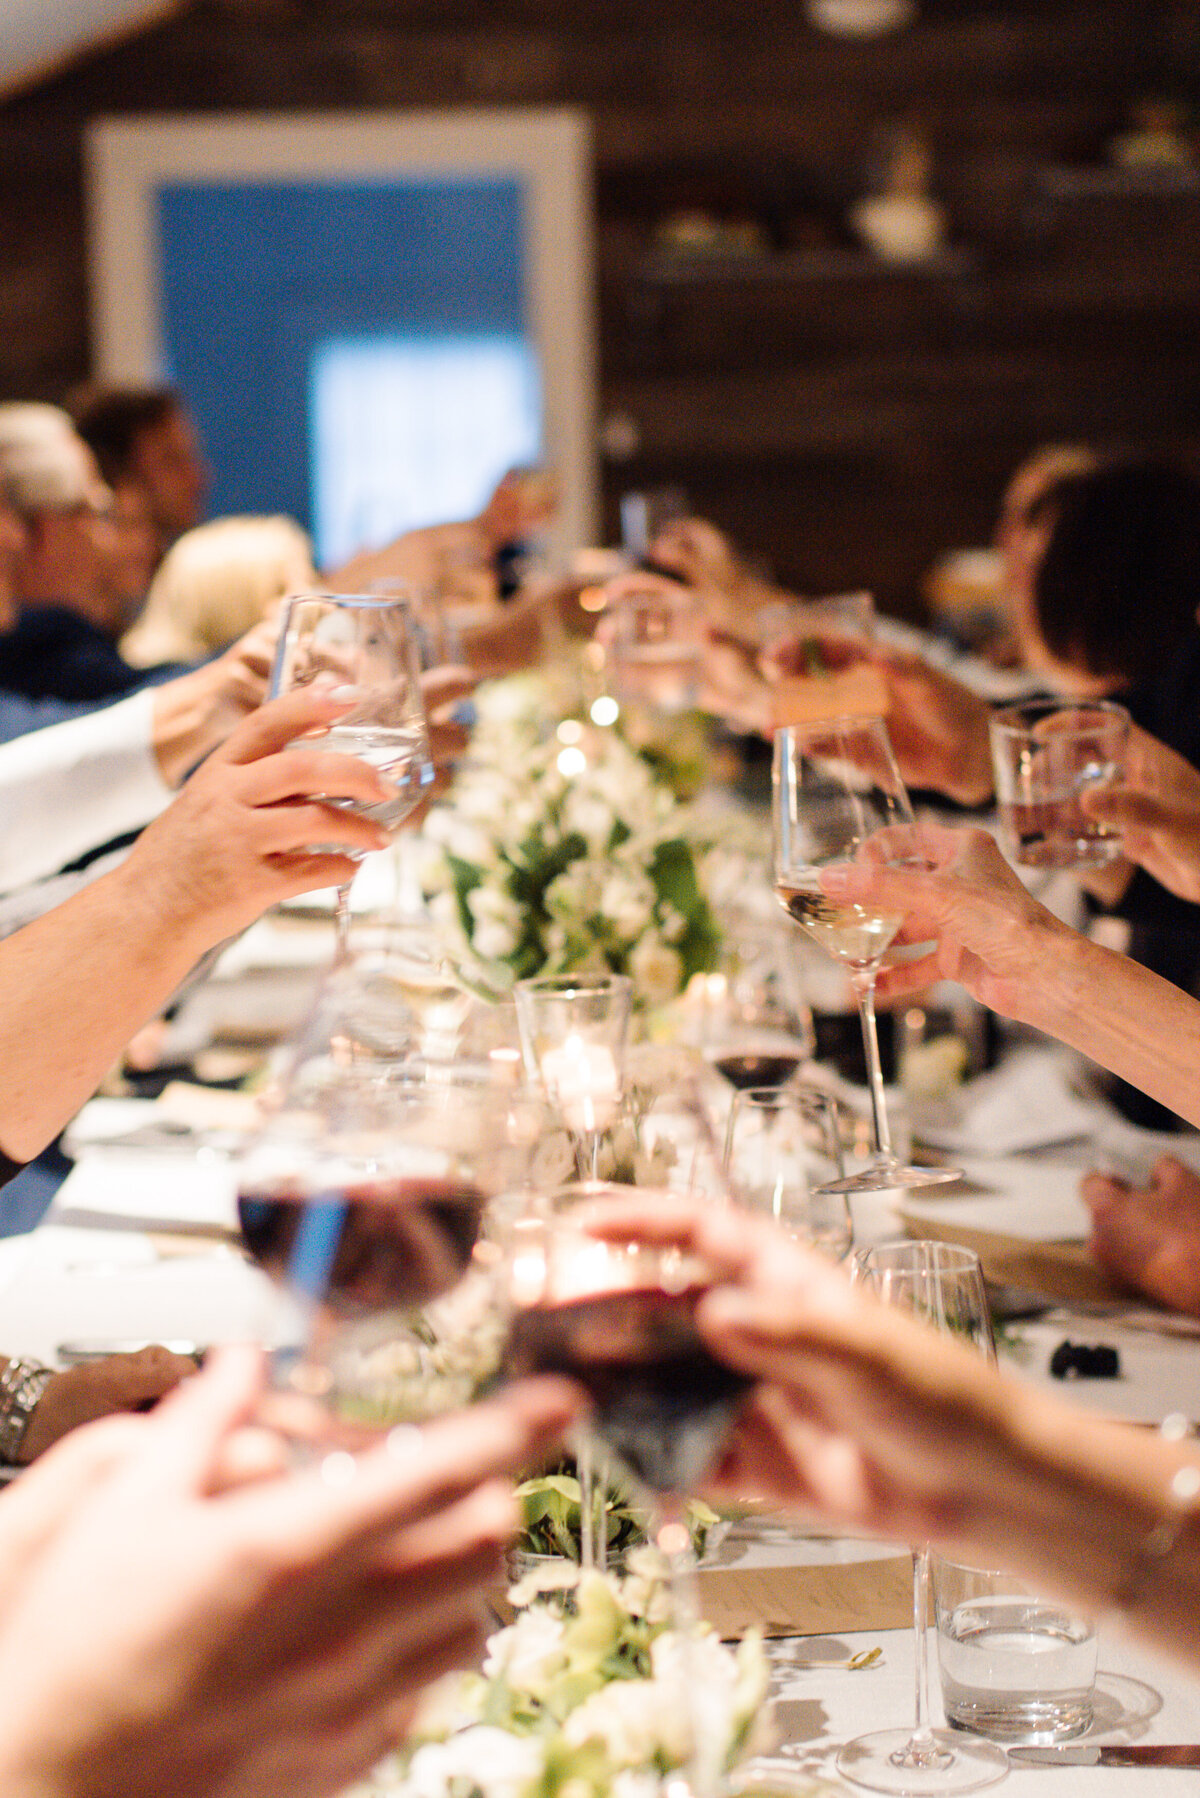 Hands reach together to toast the wedding couple with white florals by Adam